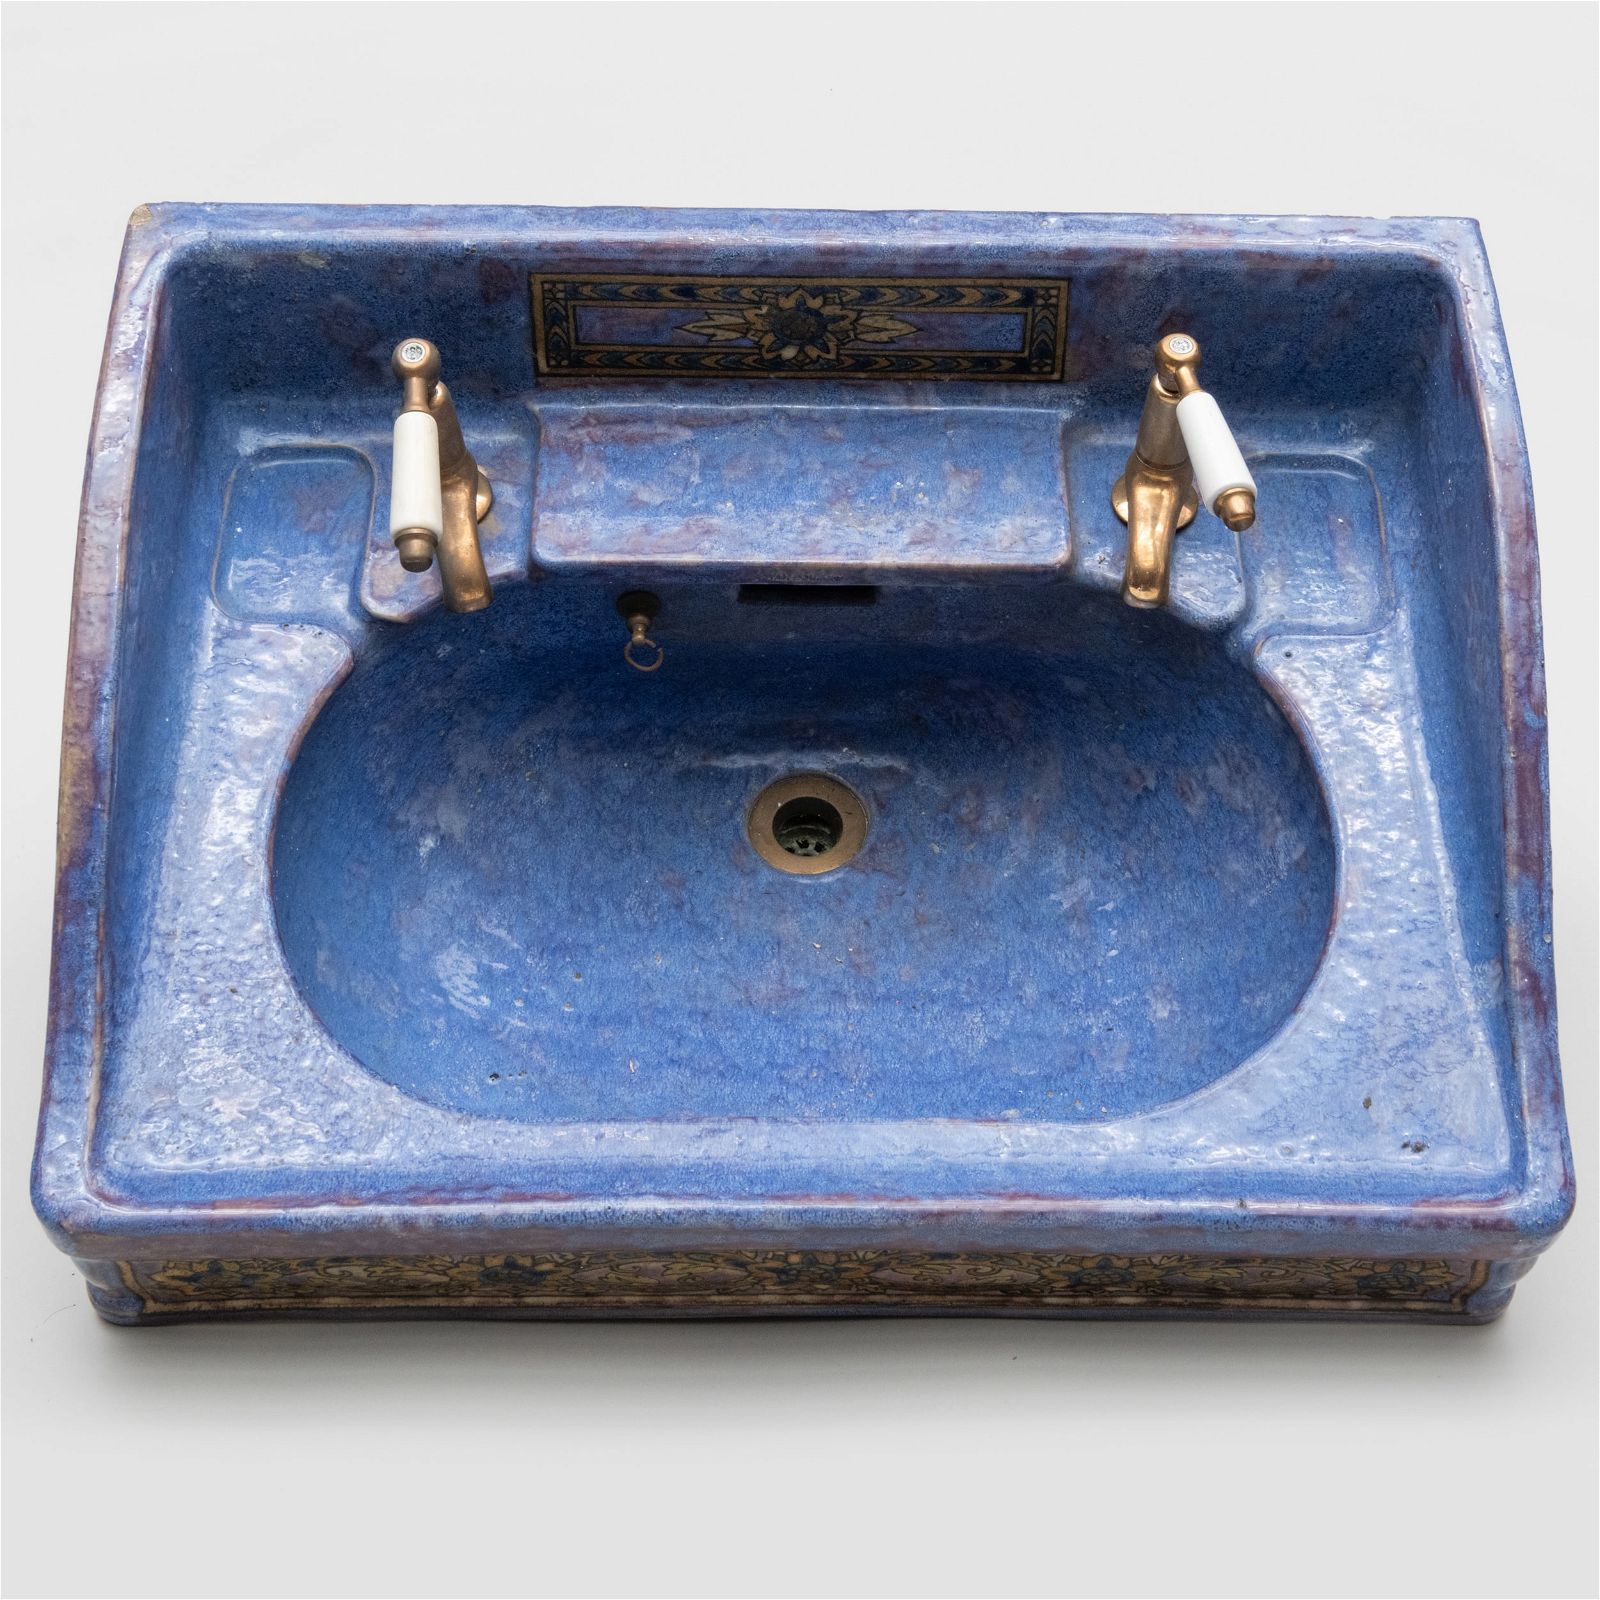 Getty collection bidders snapped up everything and the washroom sink at Stair